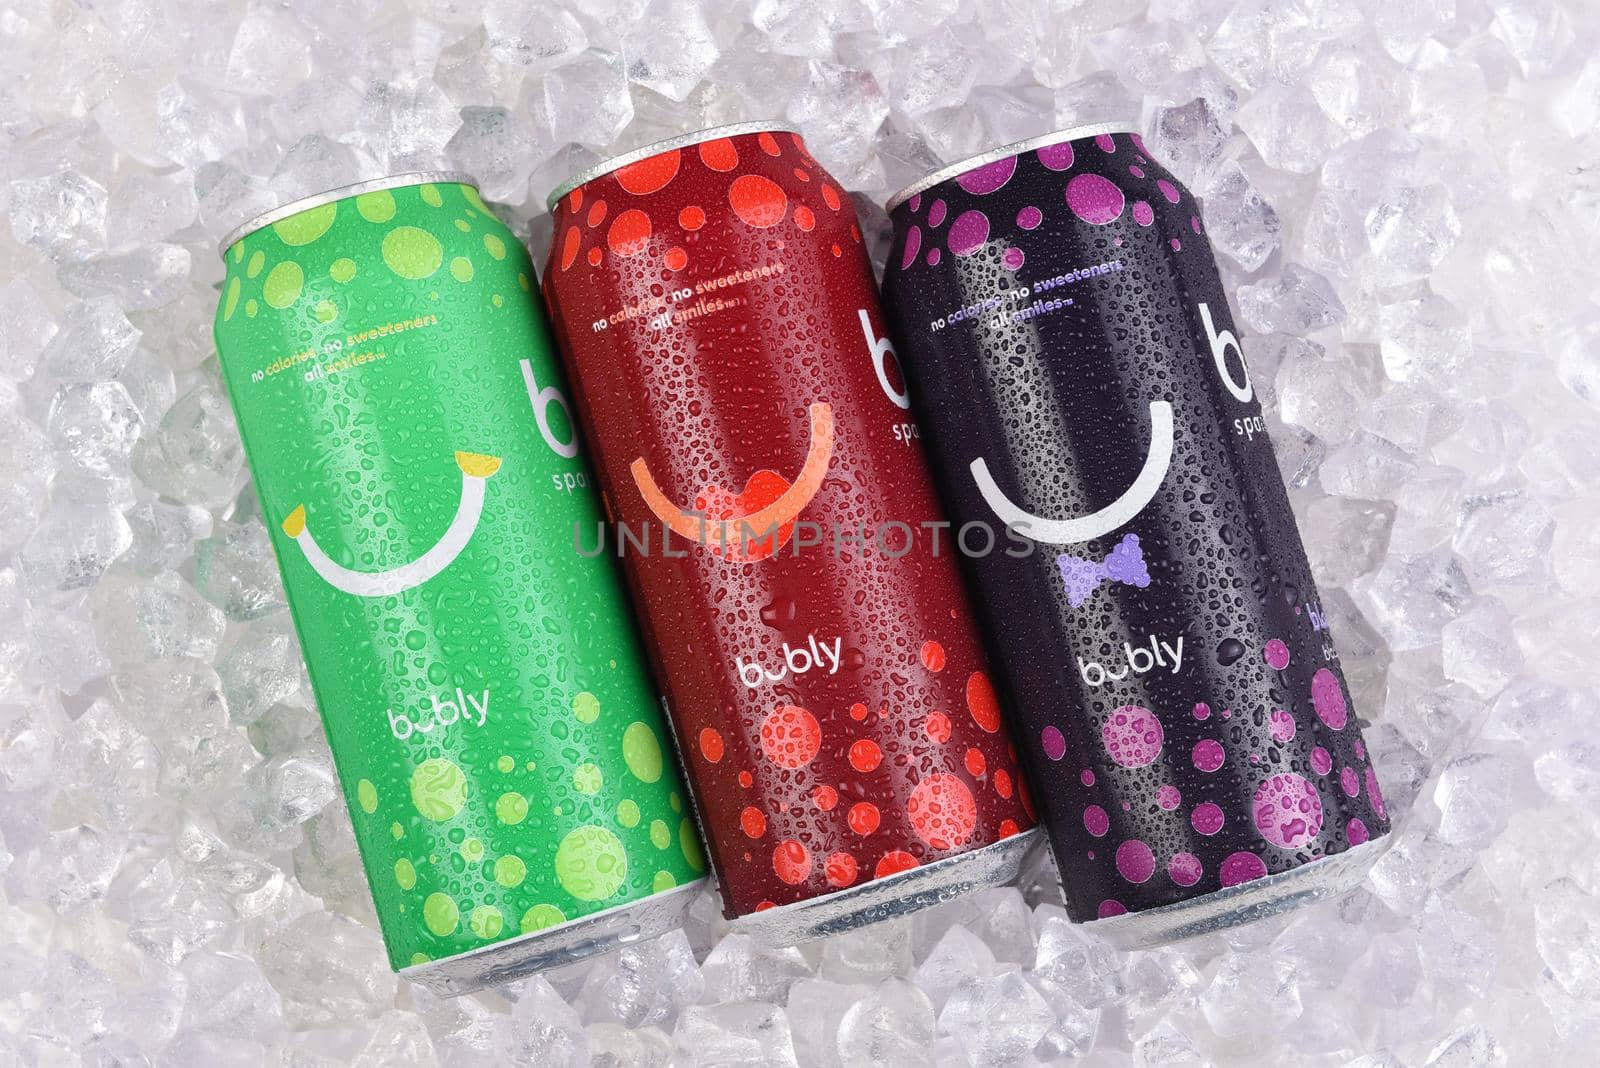 IRVINE, CALIFORNIA - 20 APRIL 2020: Three cans of Bubly Flavored Sparkling Water in a bed of ice, Lime, Cherry and Blackberry flavors.  by sCukrov